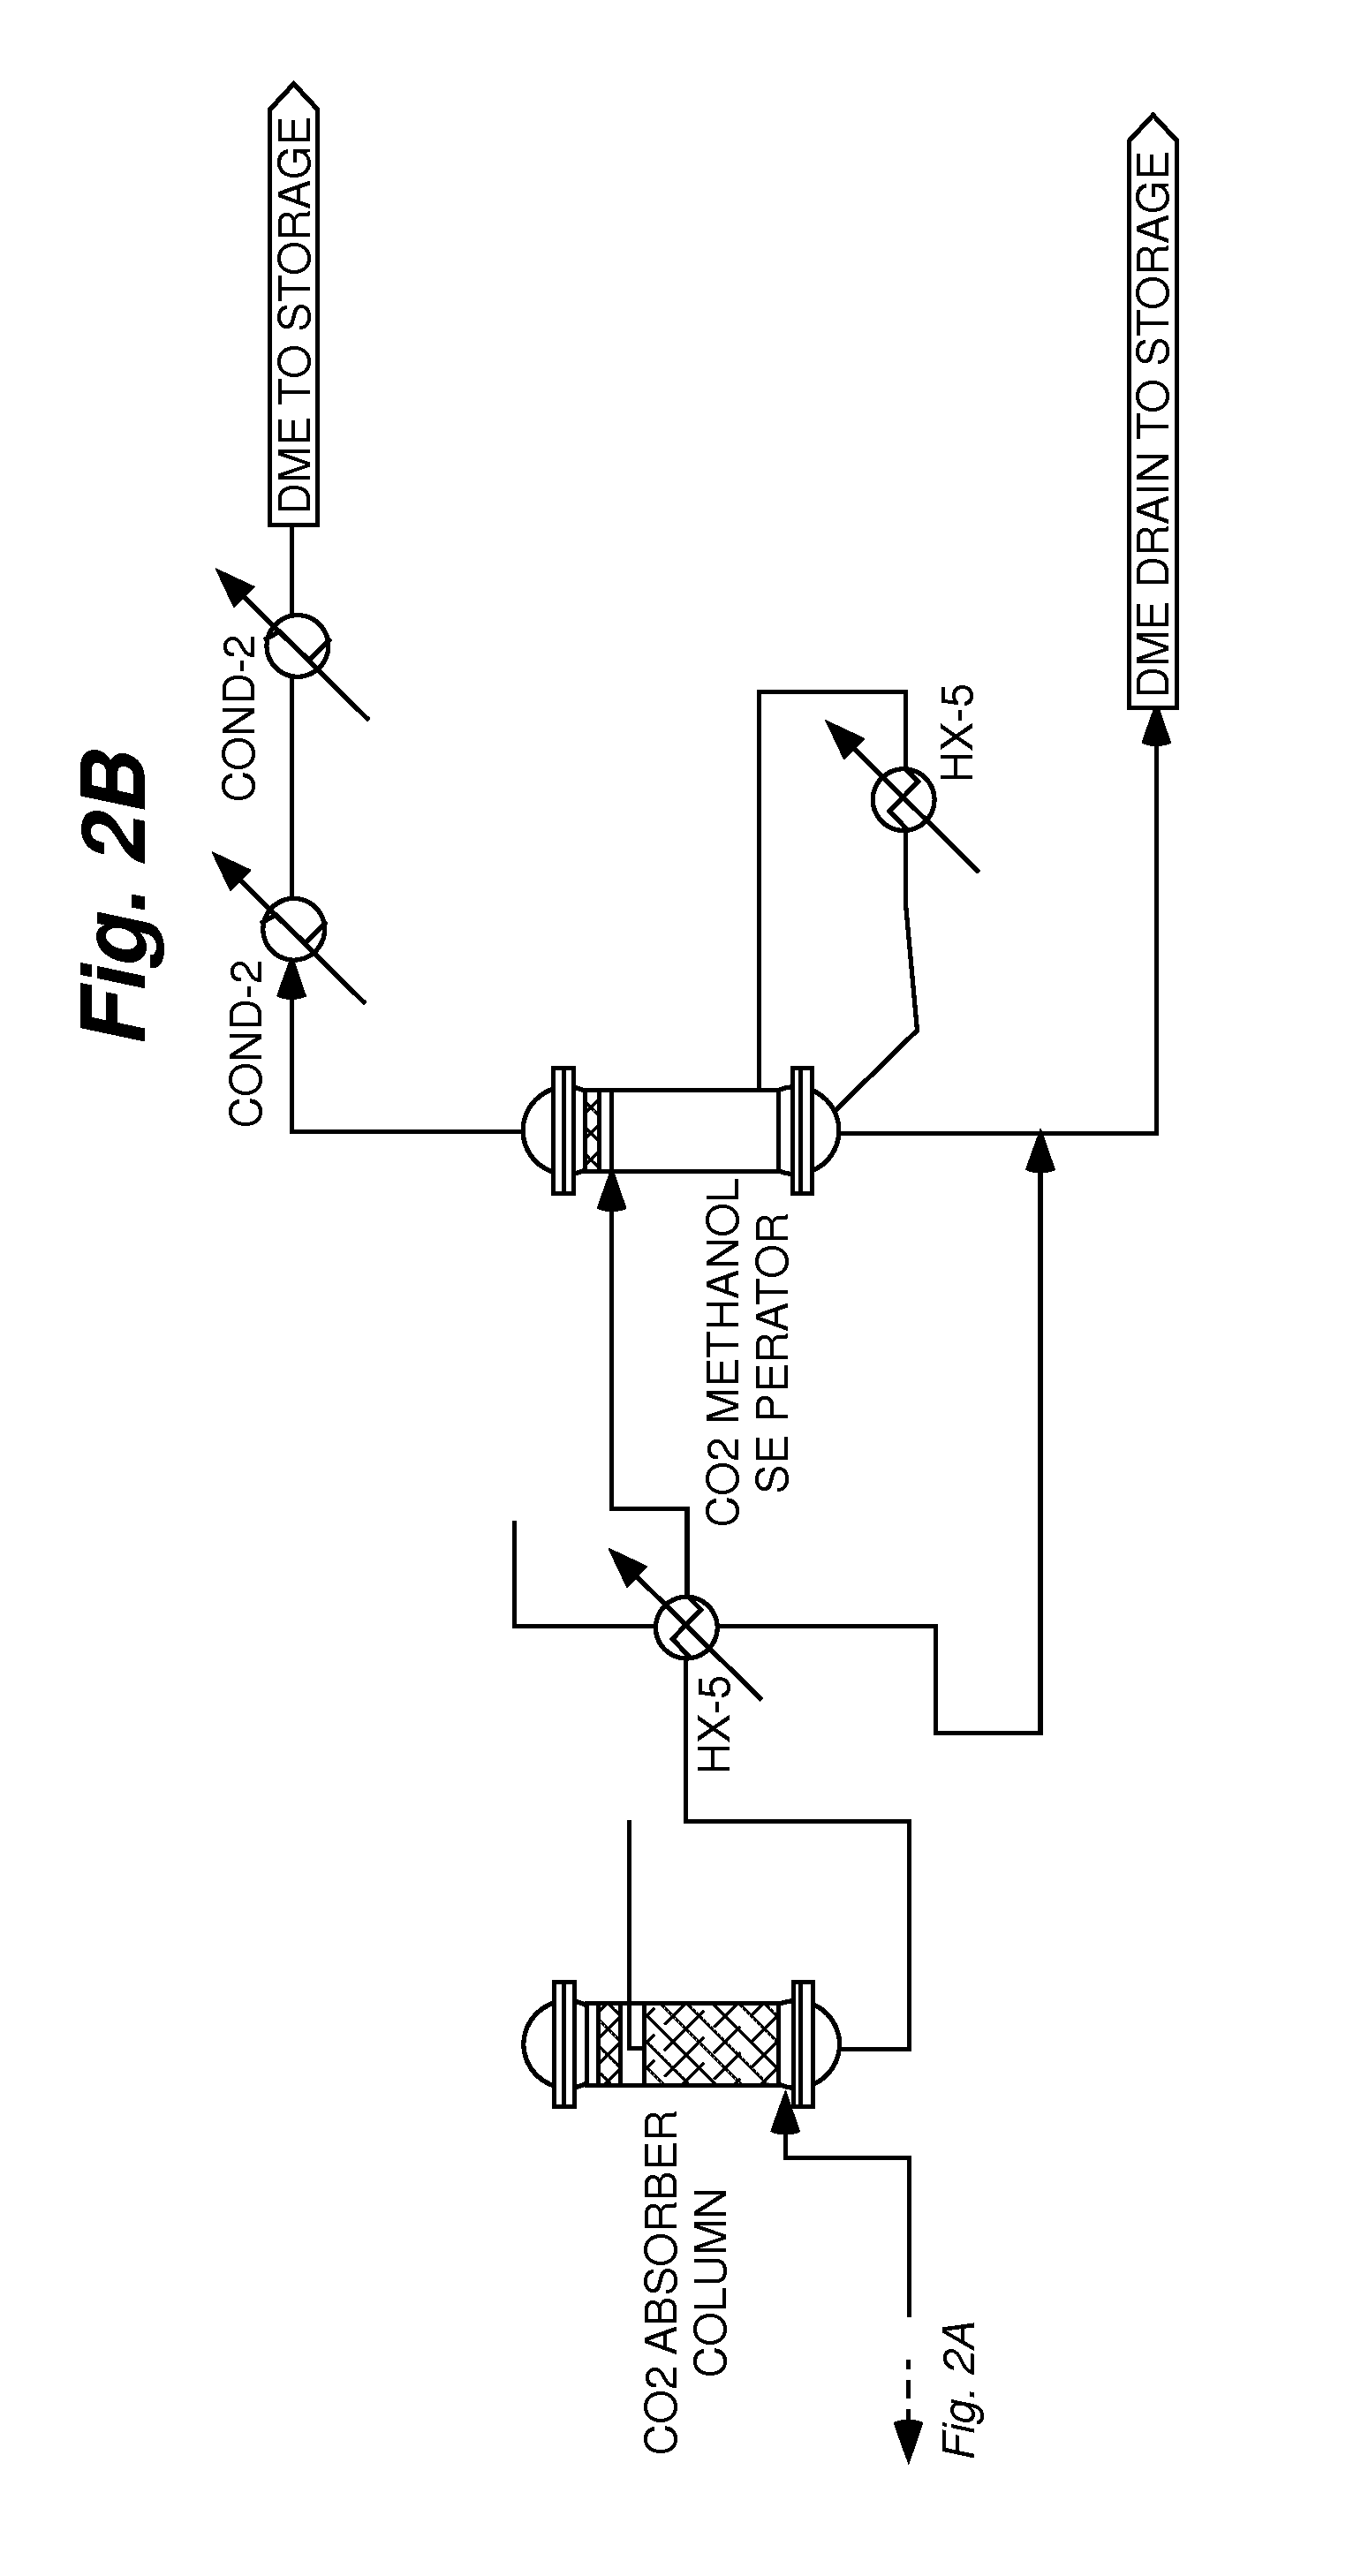 Systems and methods for manufacture of dimethyl ether (DME) from natural gas and flare gas feedstock